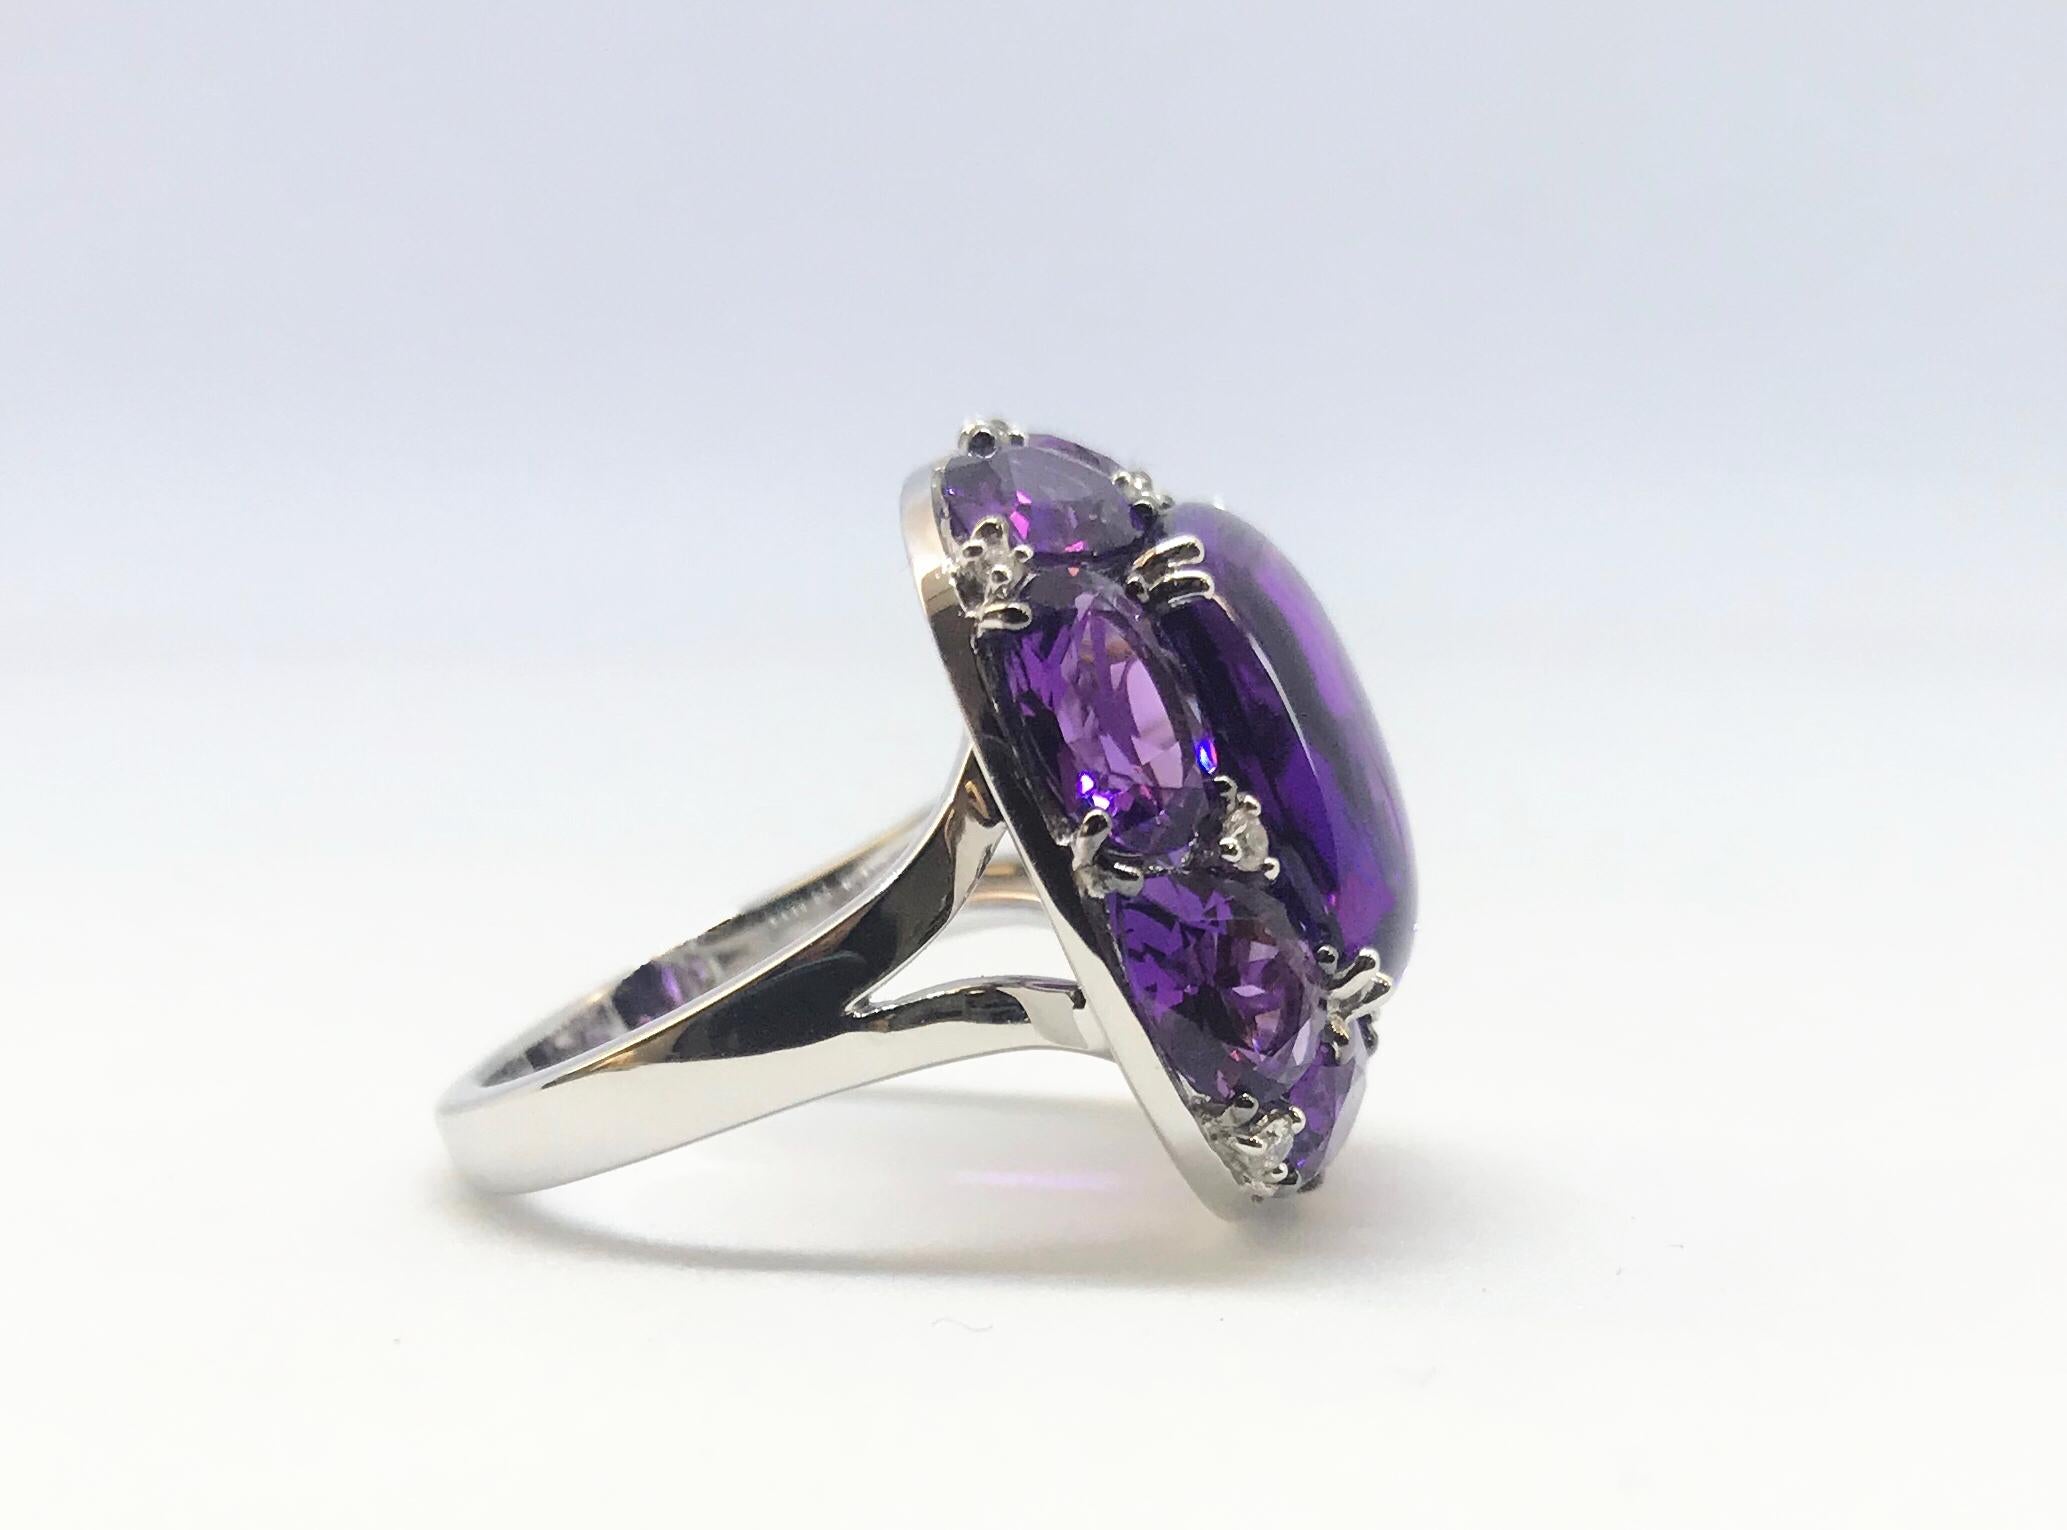 Contemporary White Gold Faceted and Cabochon-Cut Amethyst and Diamond Ring